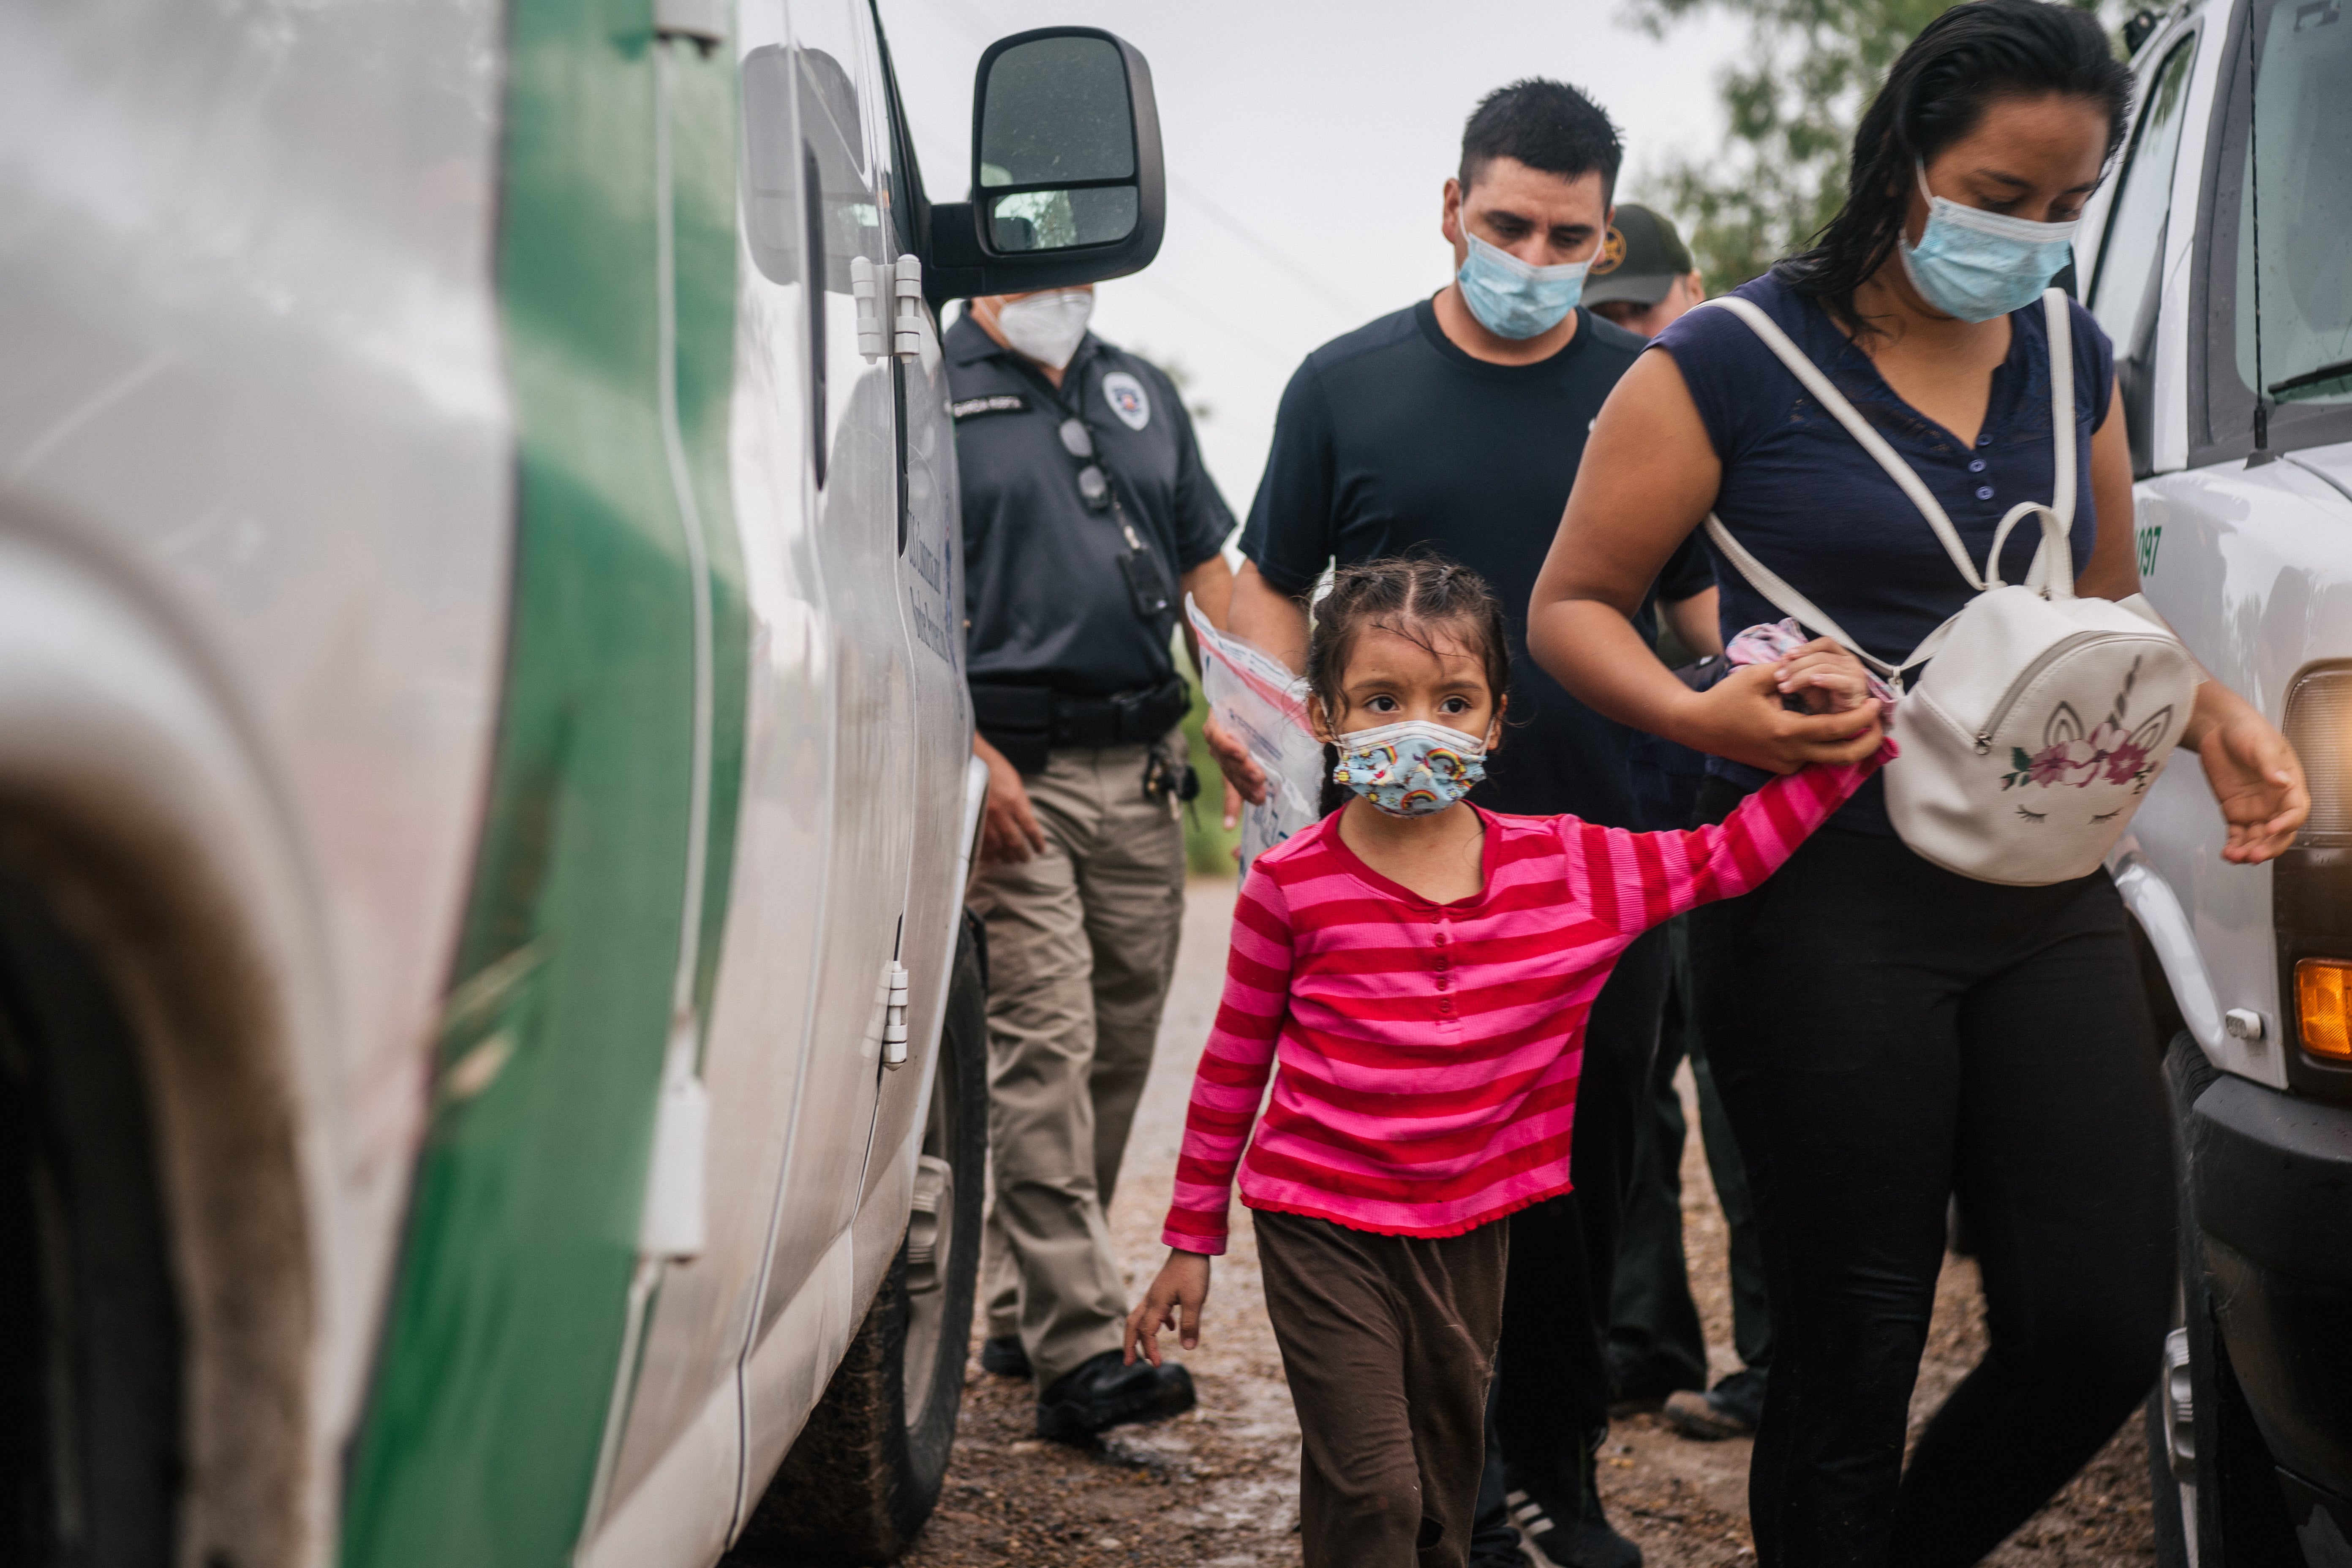 <p>An immigrant family seeking asylum prepare to be taken to a border patrol processing facility after crossing into the US on 16 June, 2021 in La Joya, Texas. US Attorney General Merrick Garland has reversed two Trump-era asylum decisions.</p>